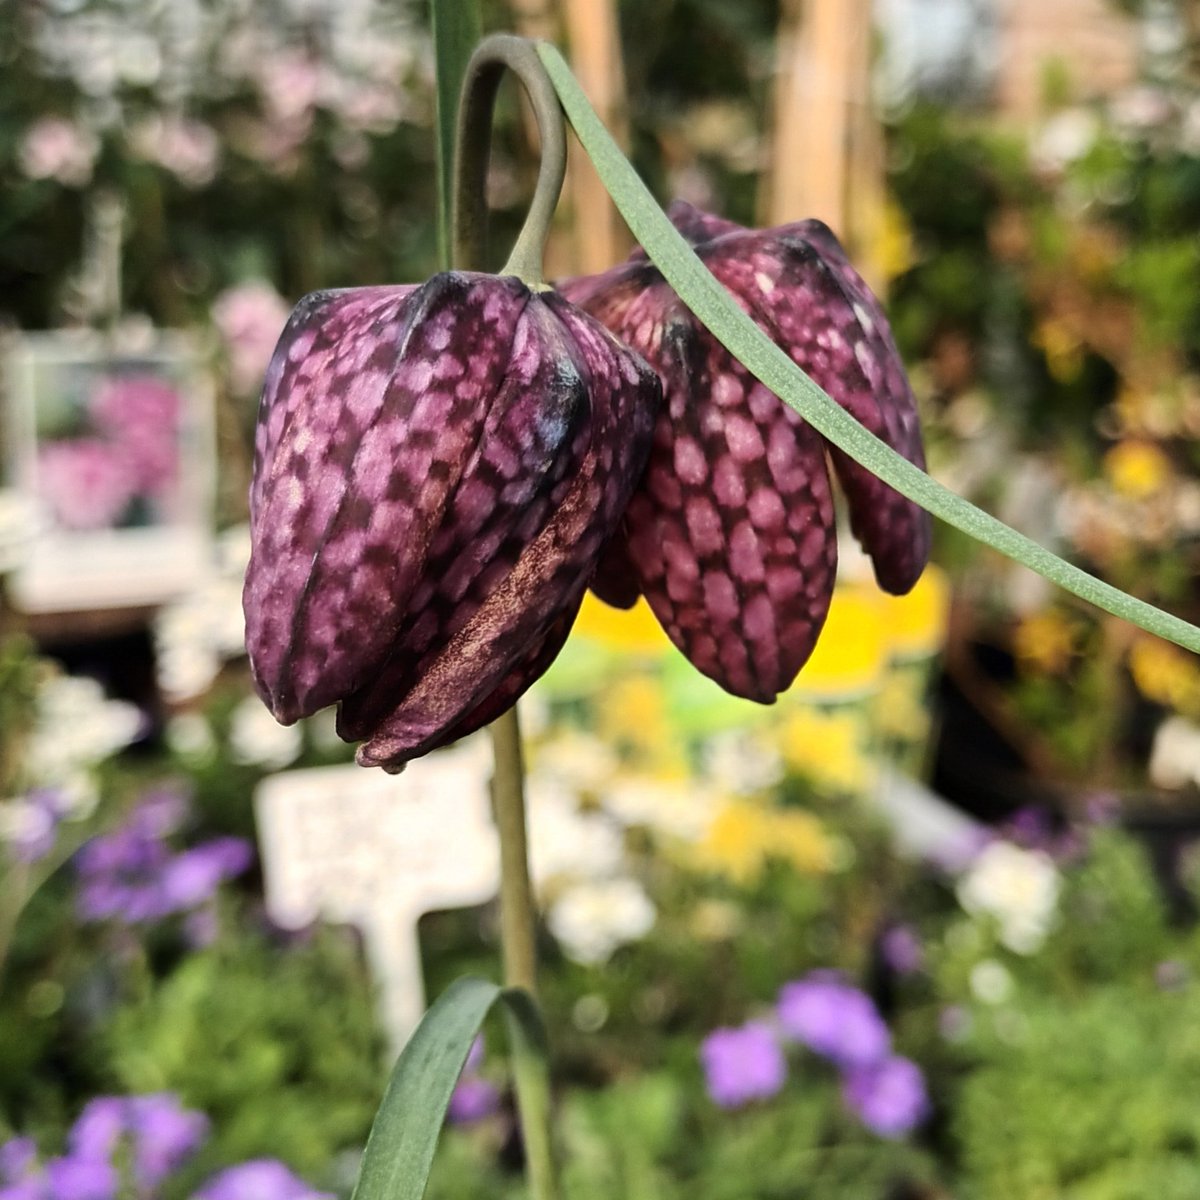 Which is your favourite fritillary? I love these chequered ones, but also have a soft spot for the pure smoke-purple f. persica. I wrote about them here: vertigrow.substack.com/p/crown-imperi…